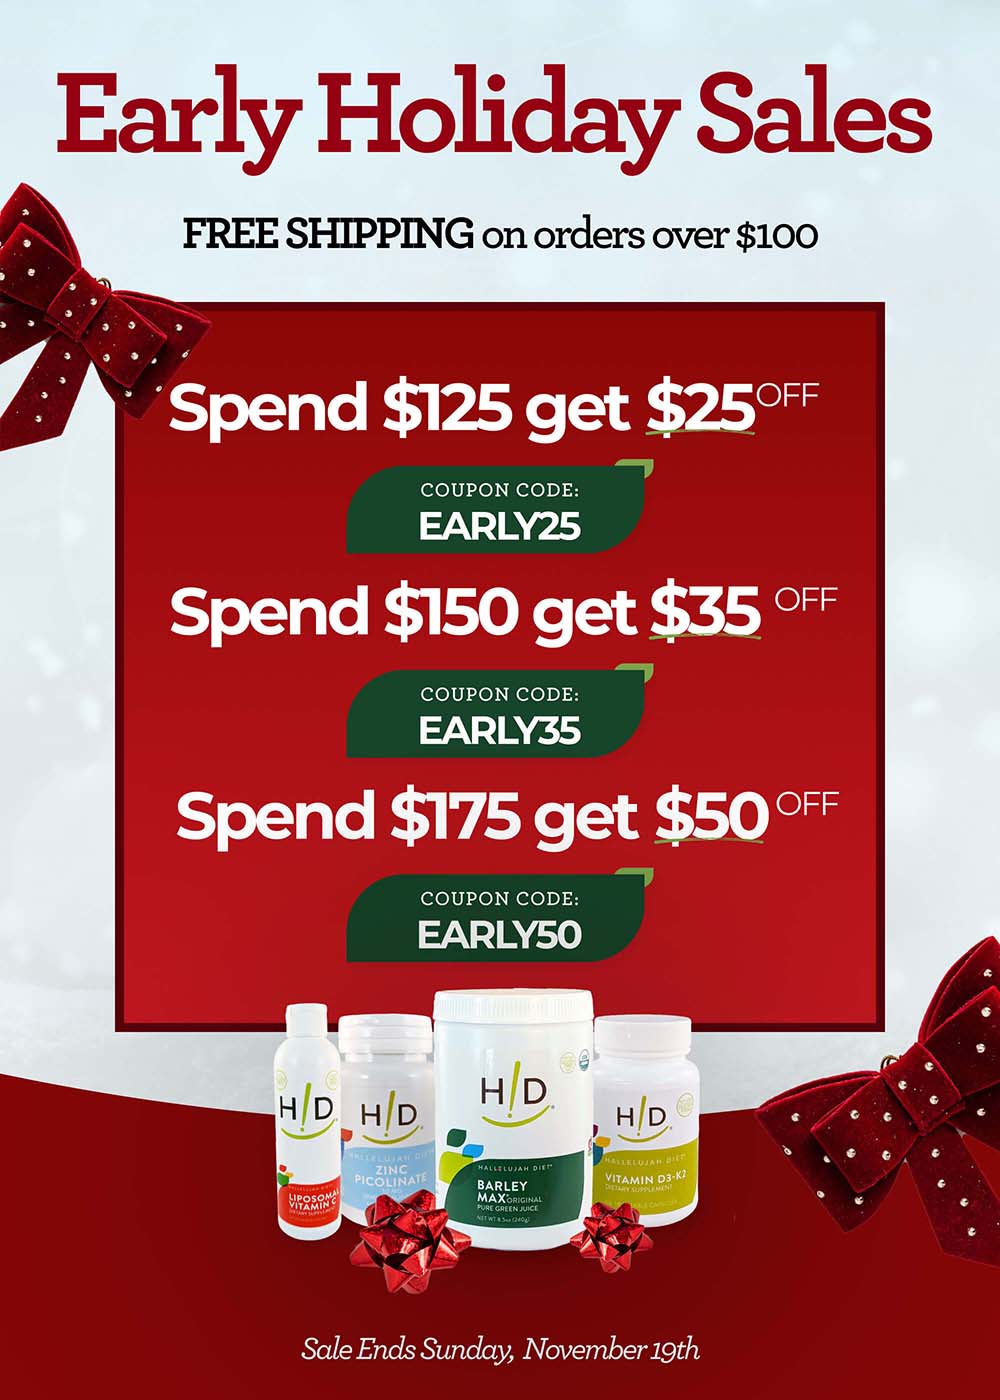 Early Holiday Sales special pricing on vegan plant-based supplements